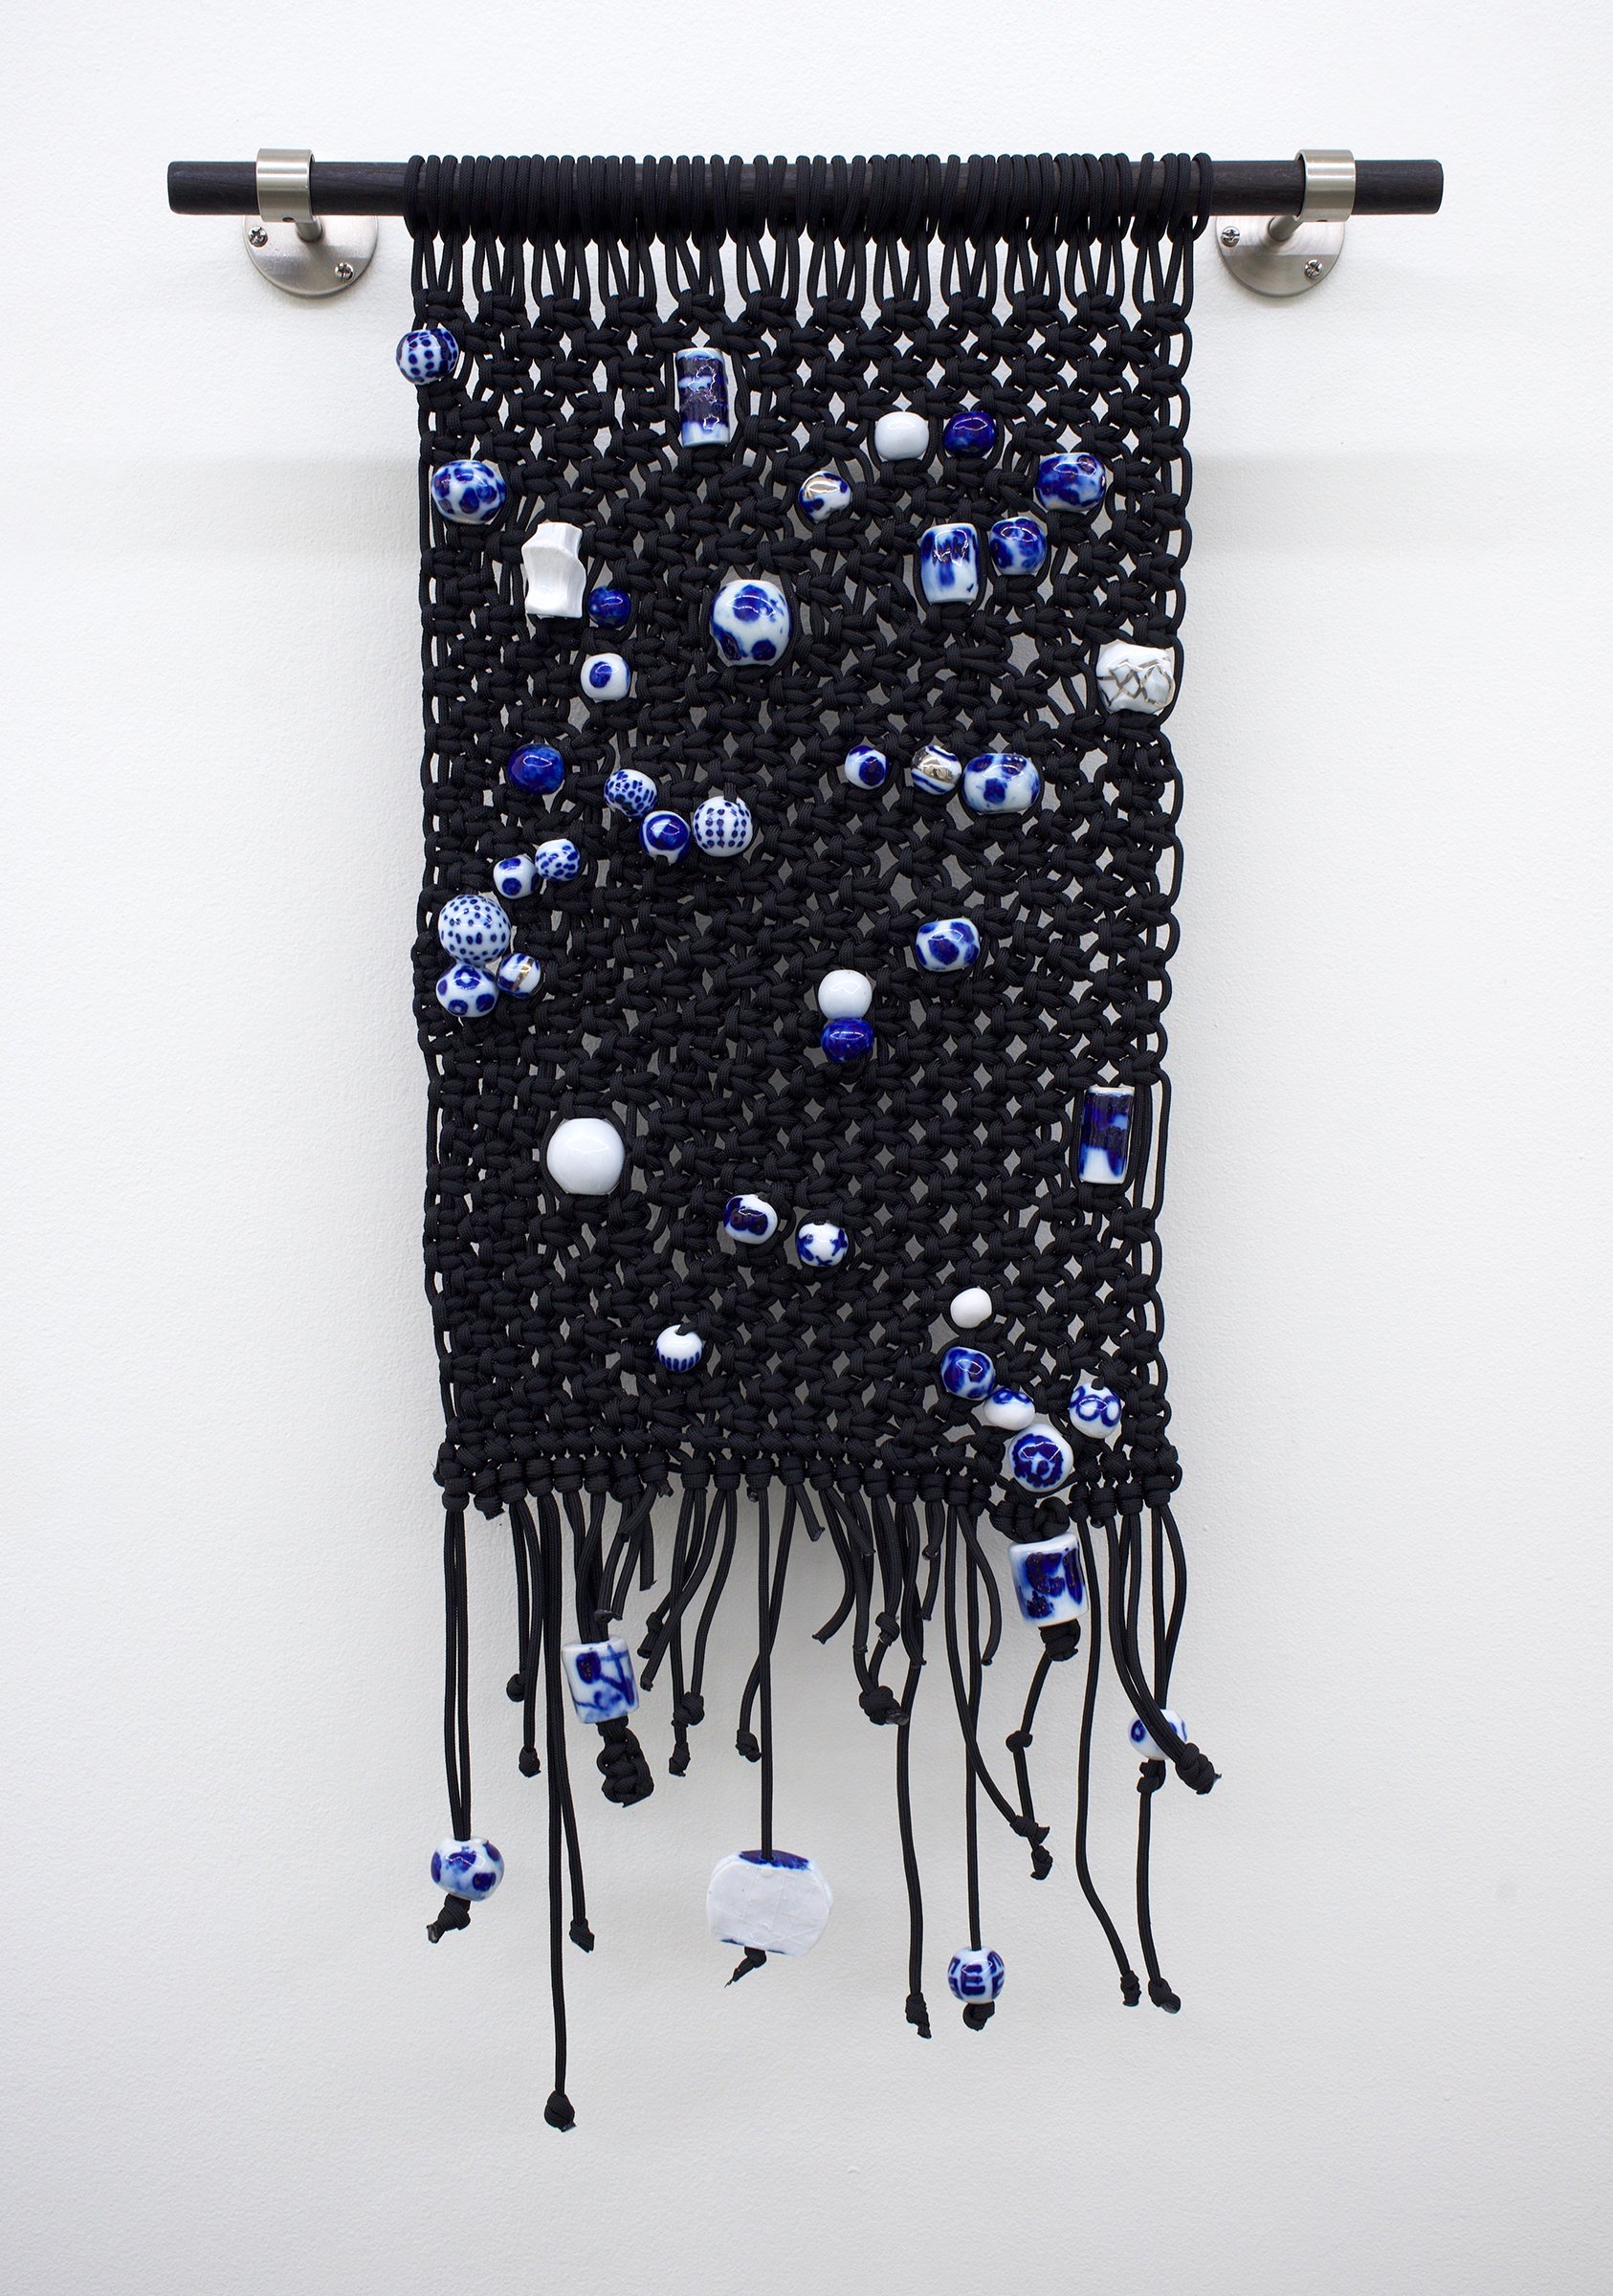   Atlas , 2021 Paracord, glazed stoneware and porcelain beads with digital decals, charred and stained wood, metal mounts 28.5” x 18” 